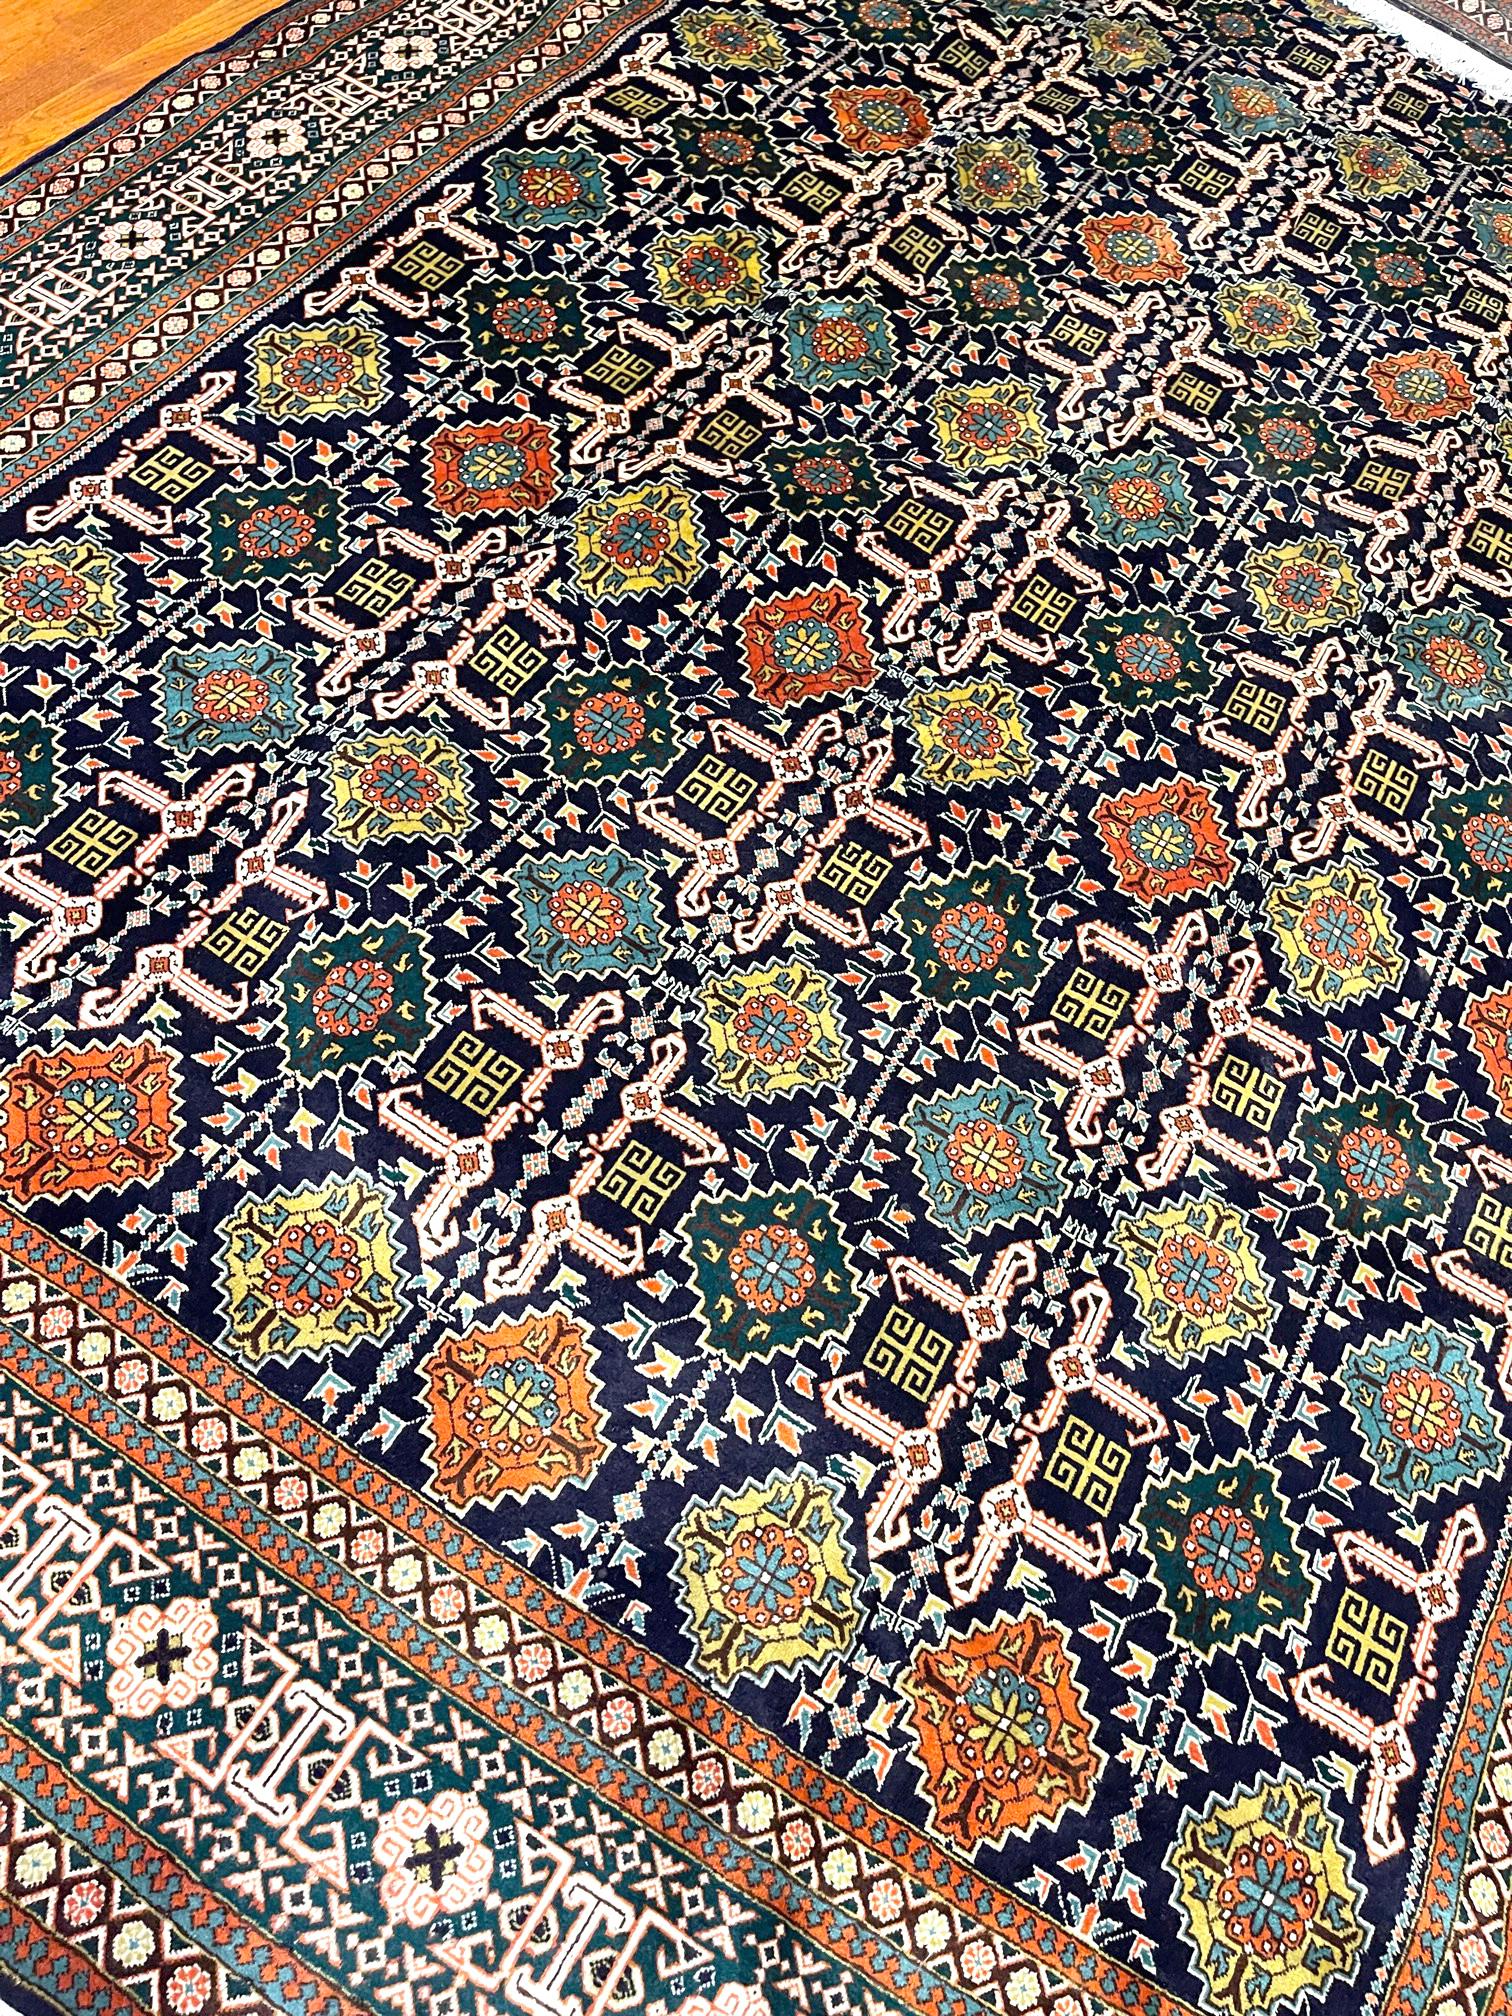 Persian Hand Knotted All over Geometric Tabriz Blue Green Rug, 1970 circa In Good Condition For Sale In San Diego, CA